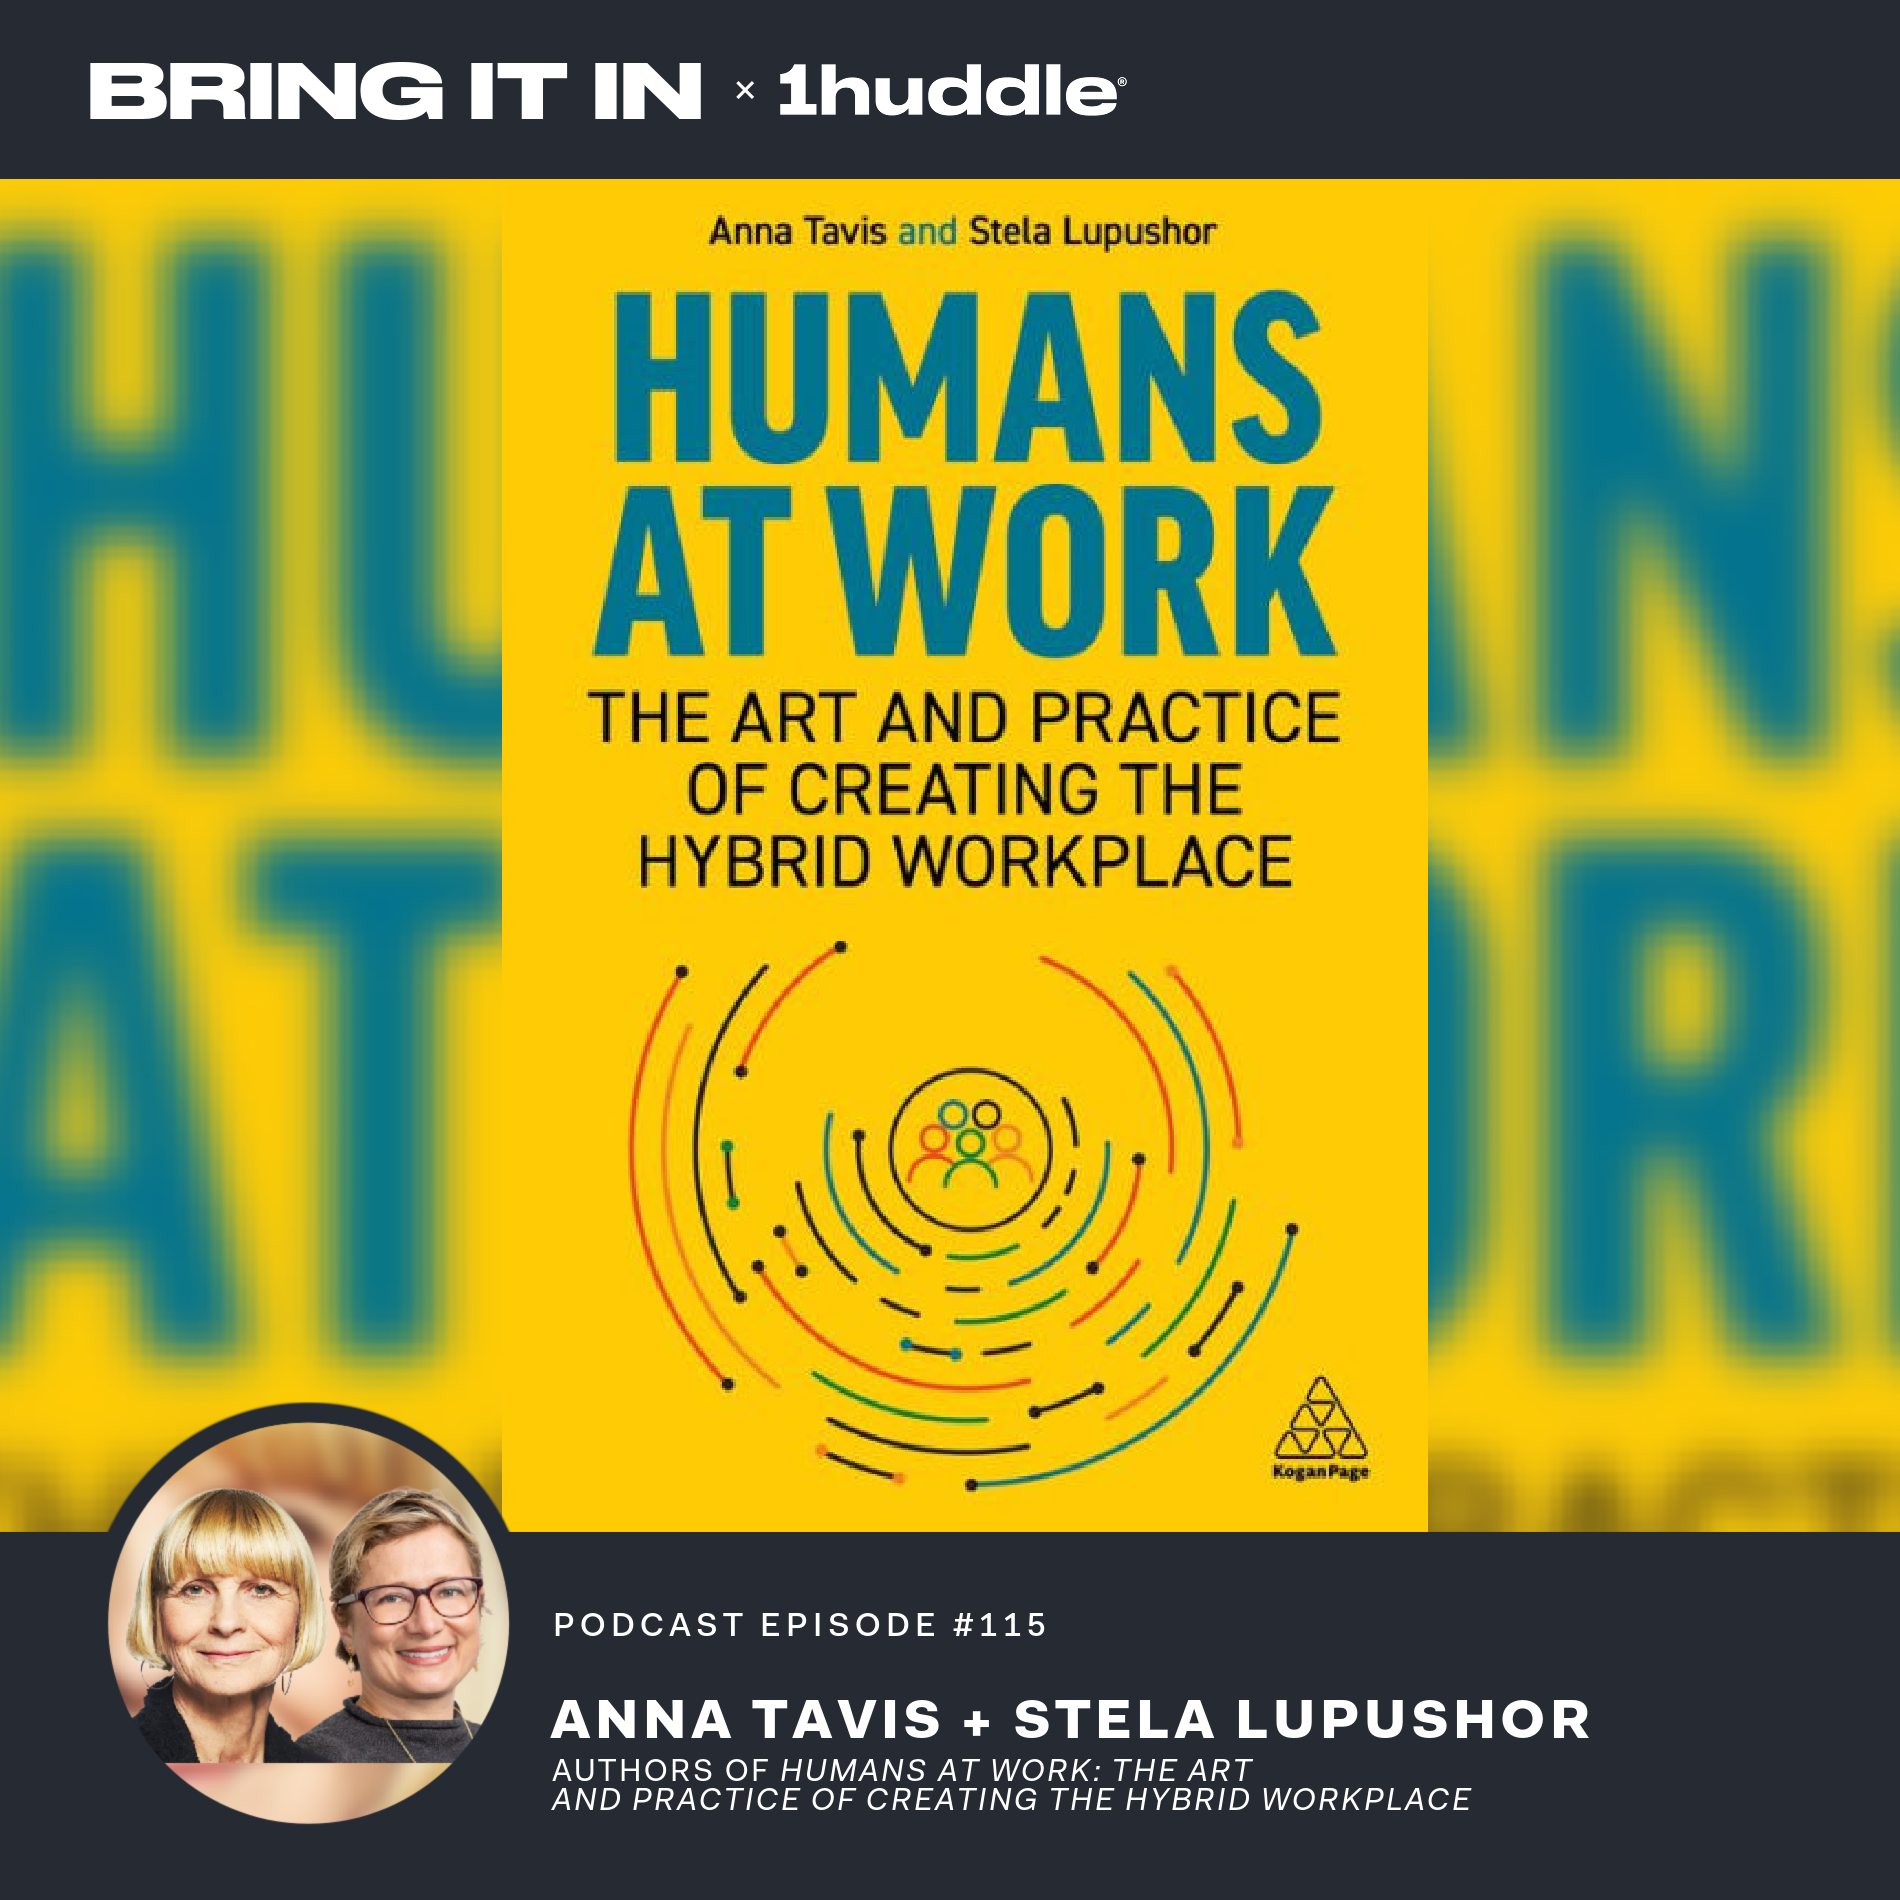 Humans at Work Authors Podcast